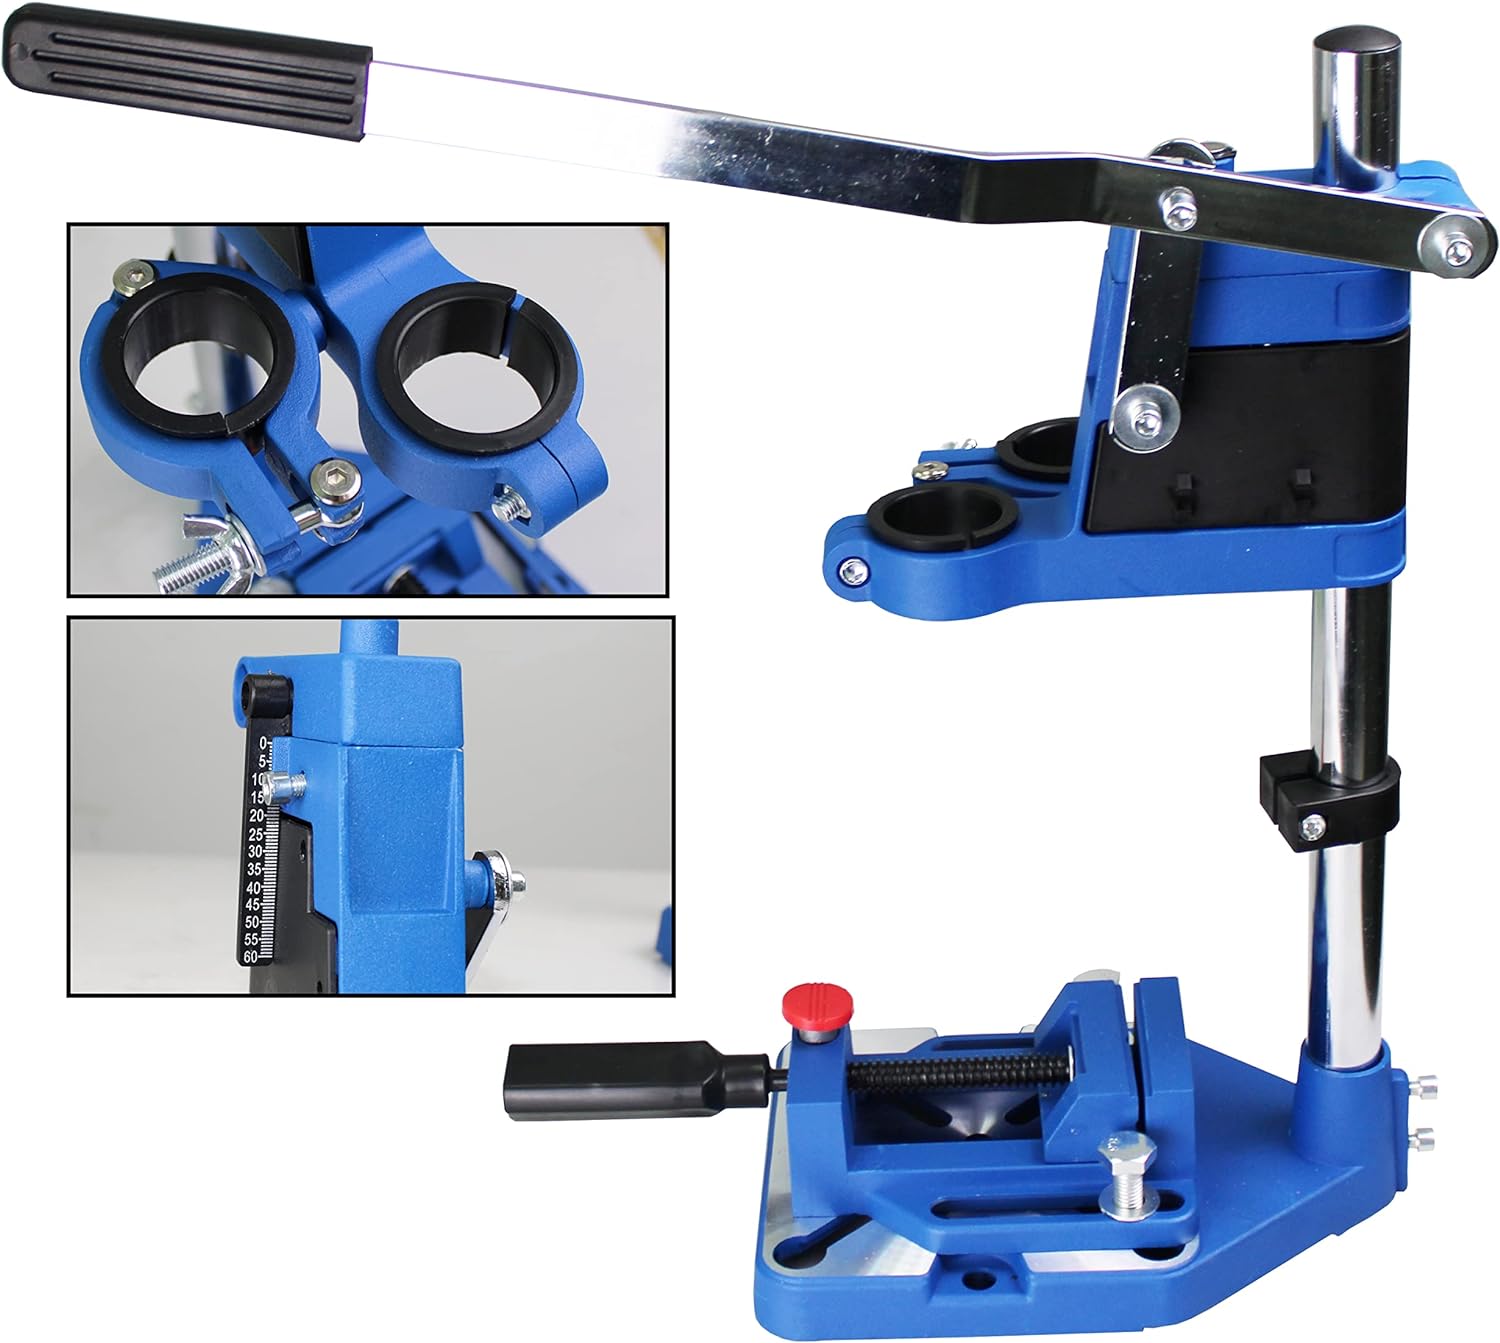 TEXALAN Drill Press Rotary Tool Workstation Stand with Wrench- 220-01- Mini Portable Drill Press- Tool Holder- 2 inch Drill Depth- Idea